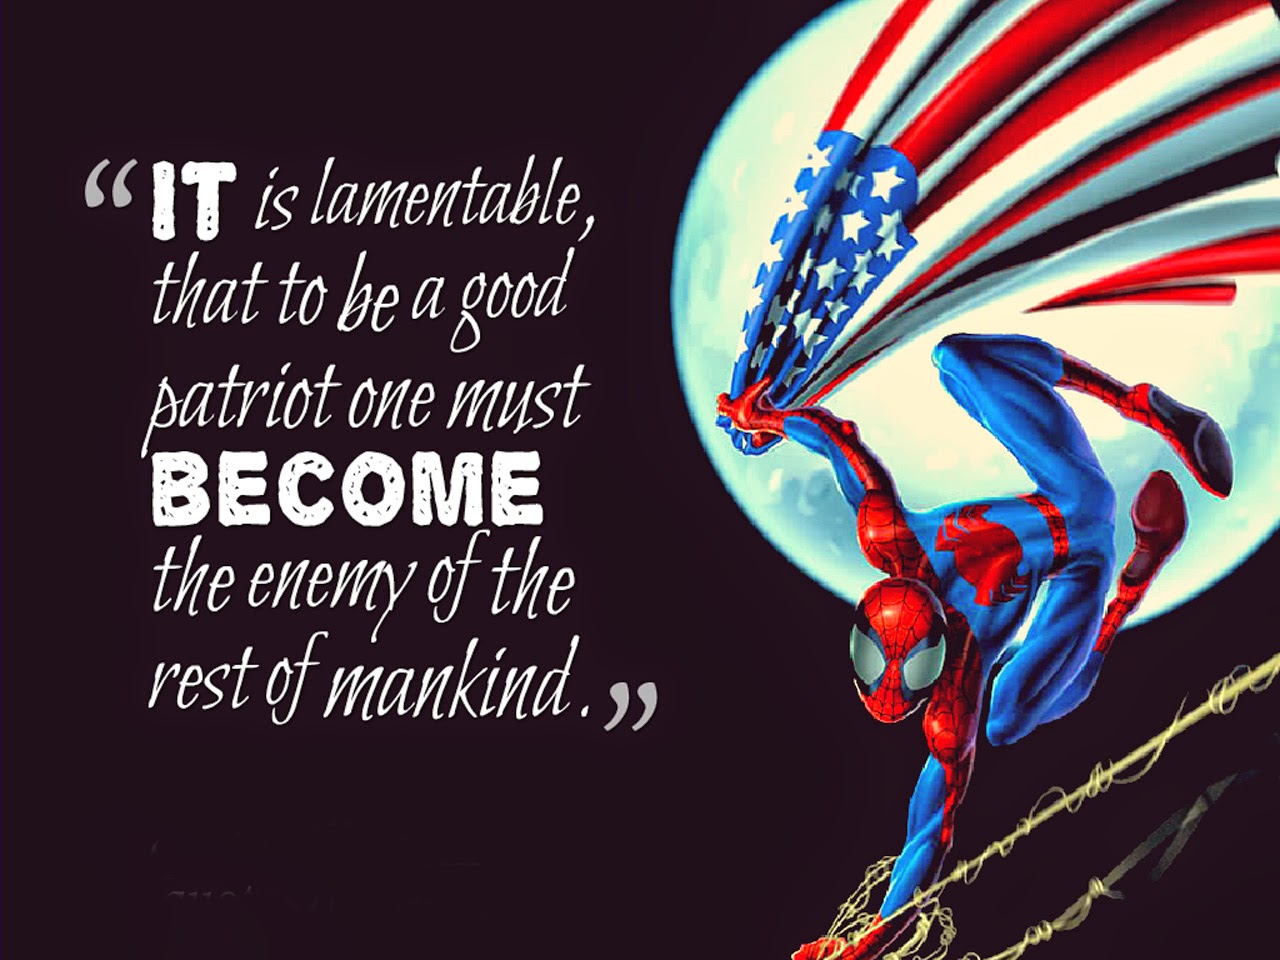 It is lamentable, that to be a good patriot one must become the enemy of the rest of mankind